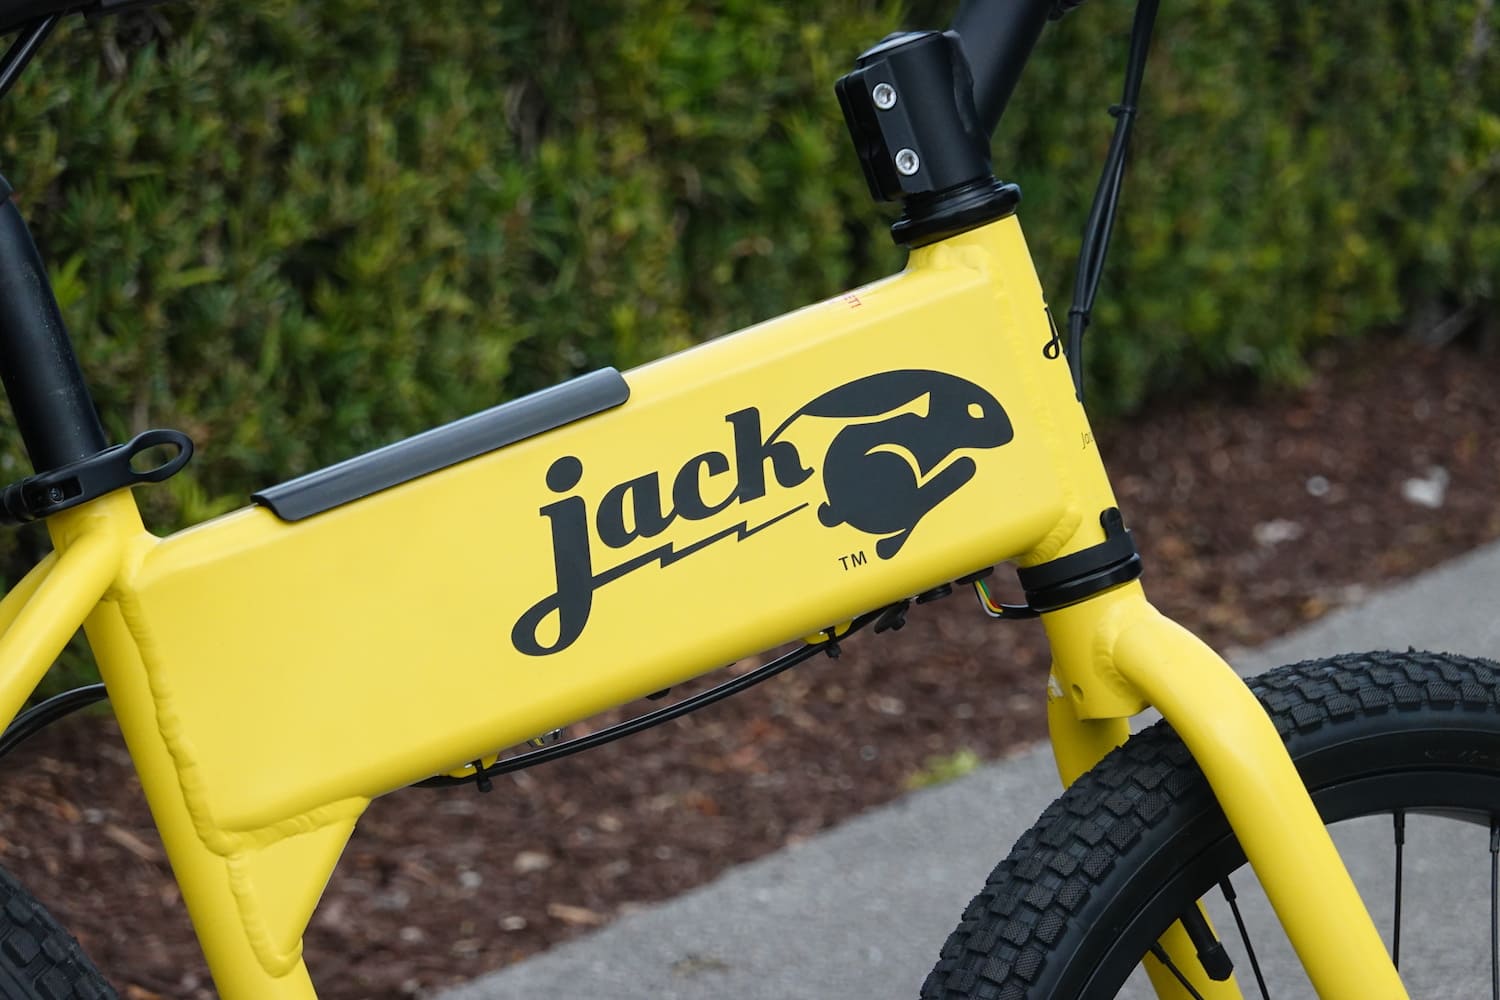 JackRabbit review: This odd-looking 20 mph 'micro electric bike' is